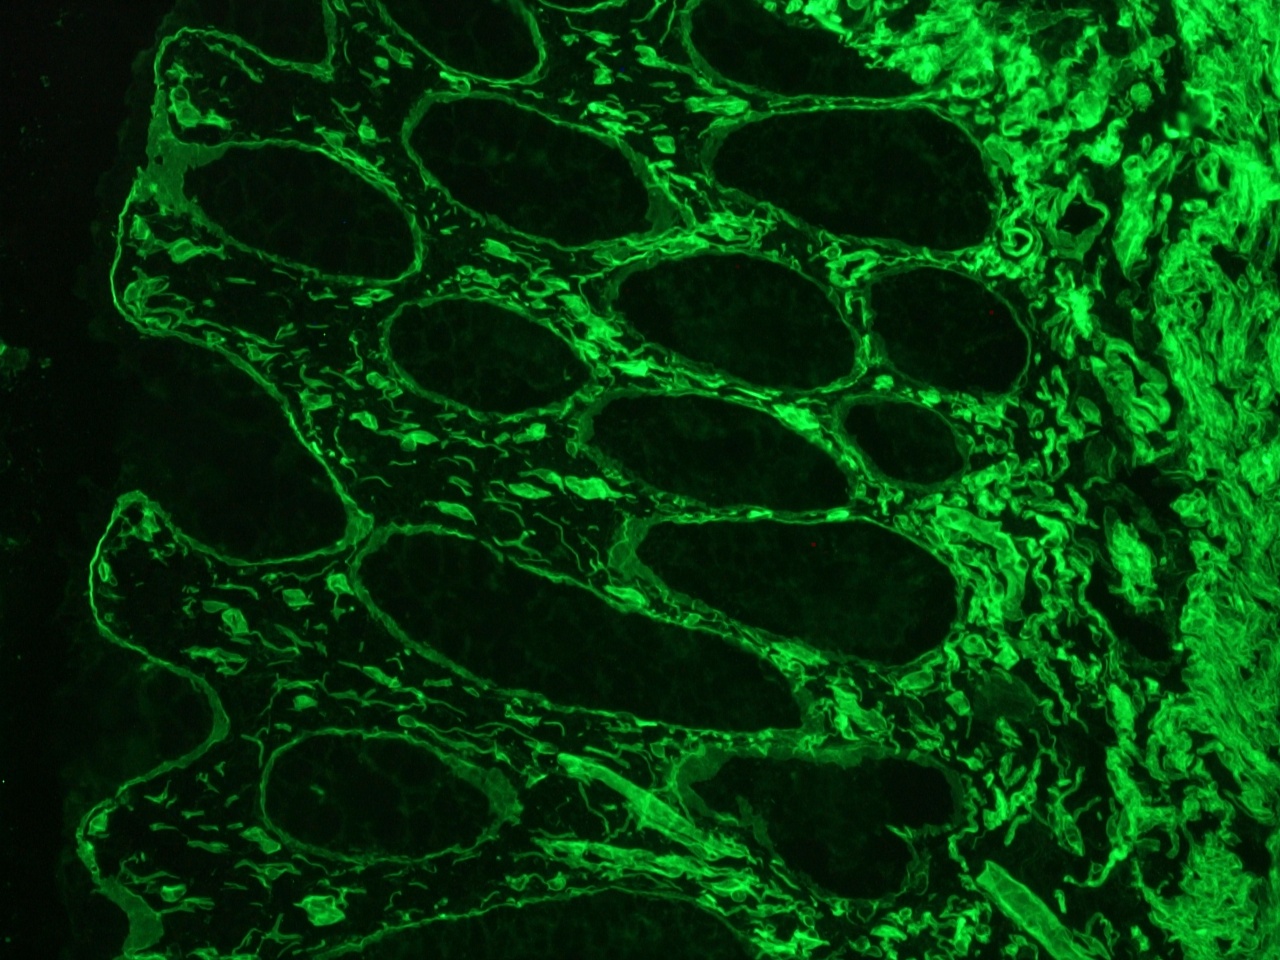 Figure 1. Immunofluorescence staining of frozen sections from human colon (methanol fixed) using MUB1100P, showing the localization of laminin in the connective tissue and in basement membranes surrounding the epithelial crypts and villi.